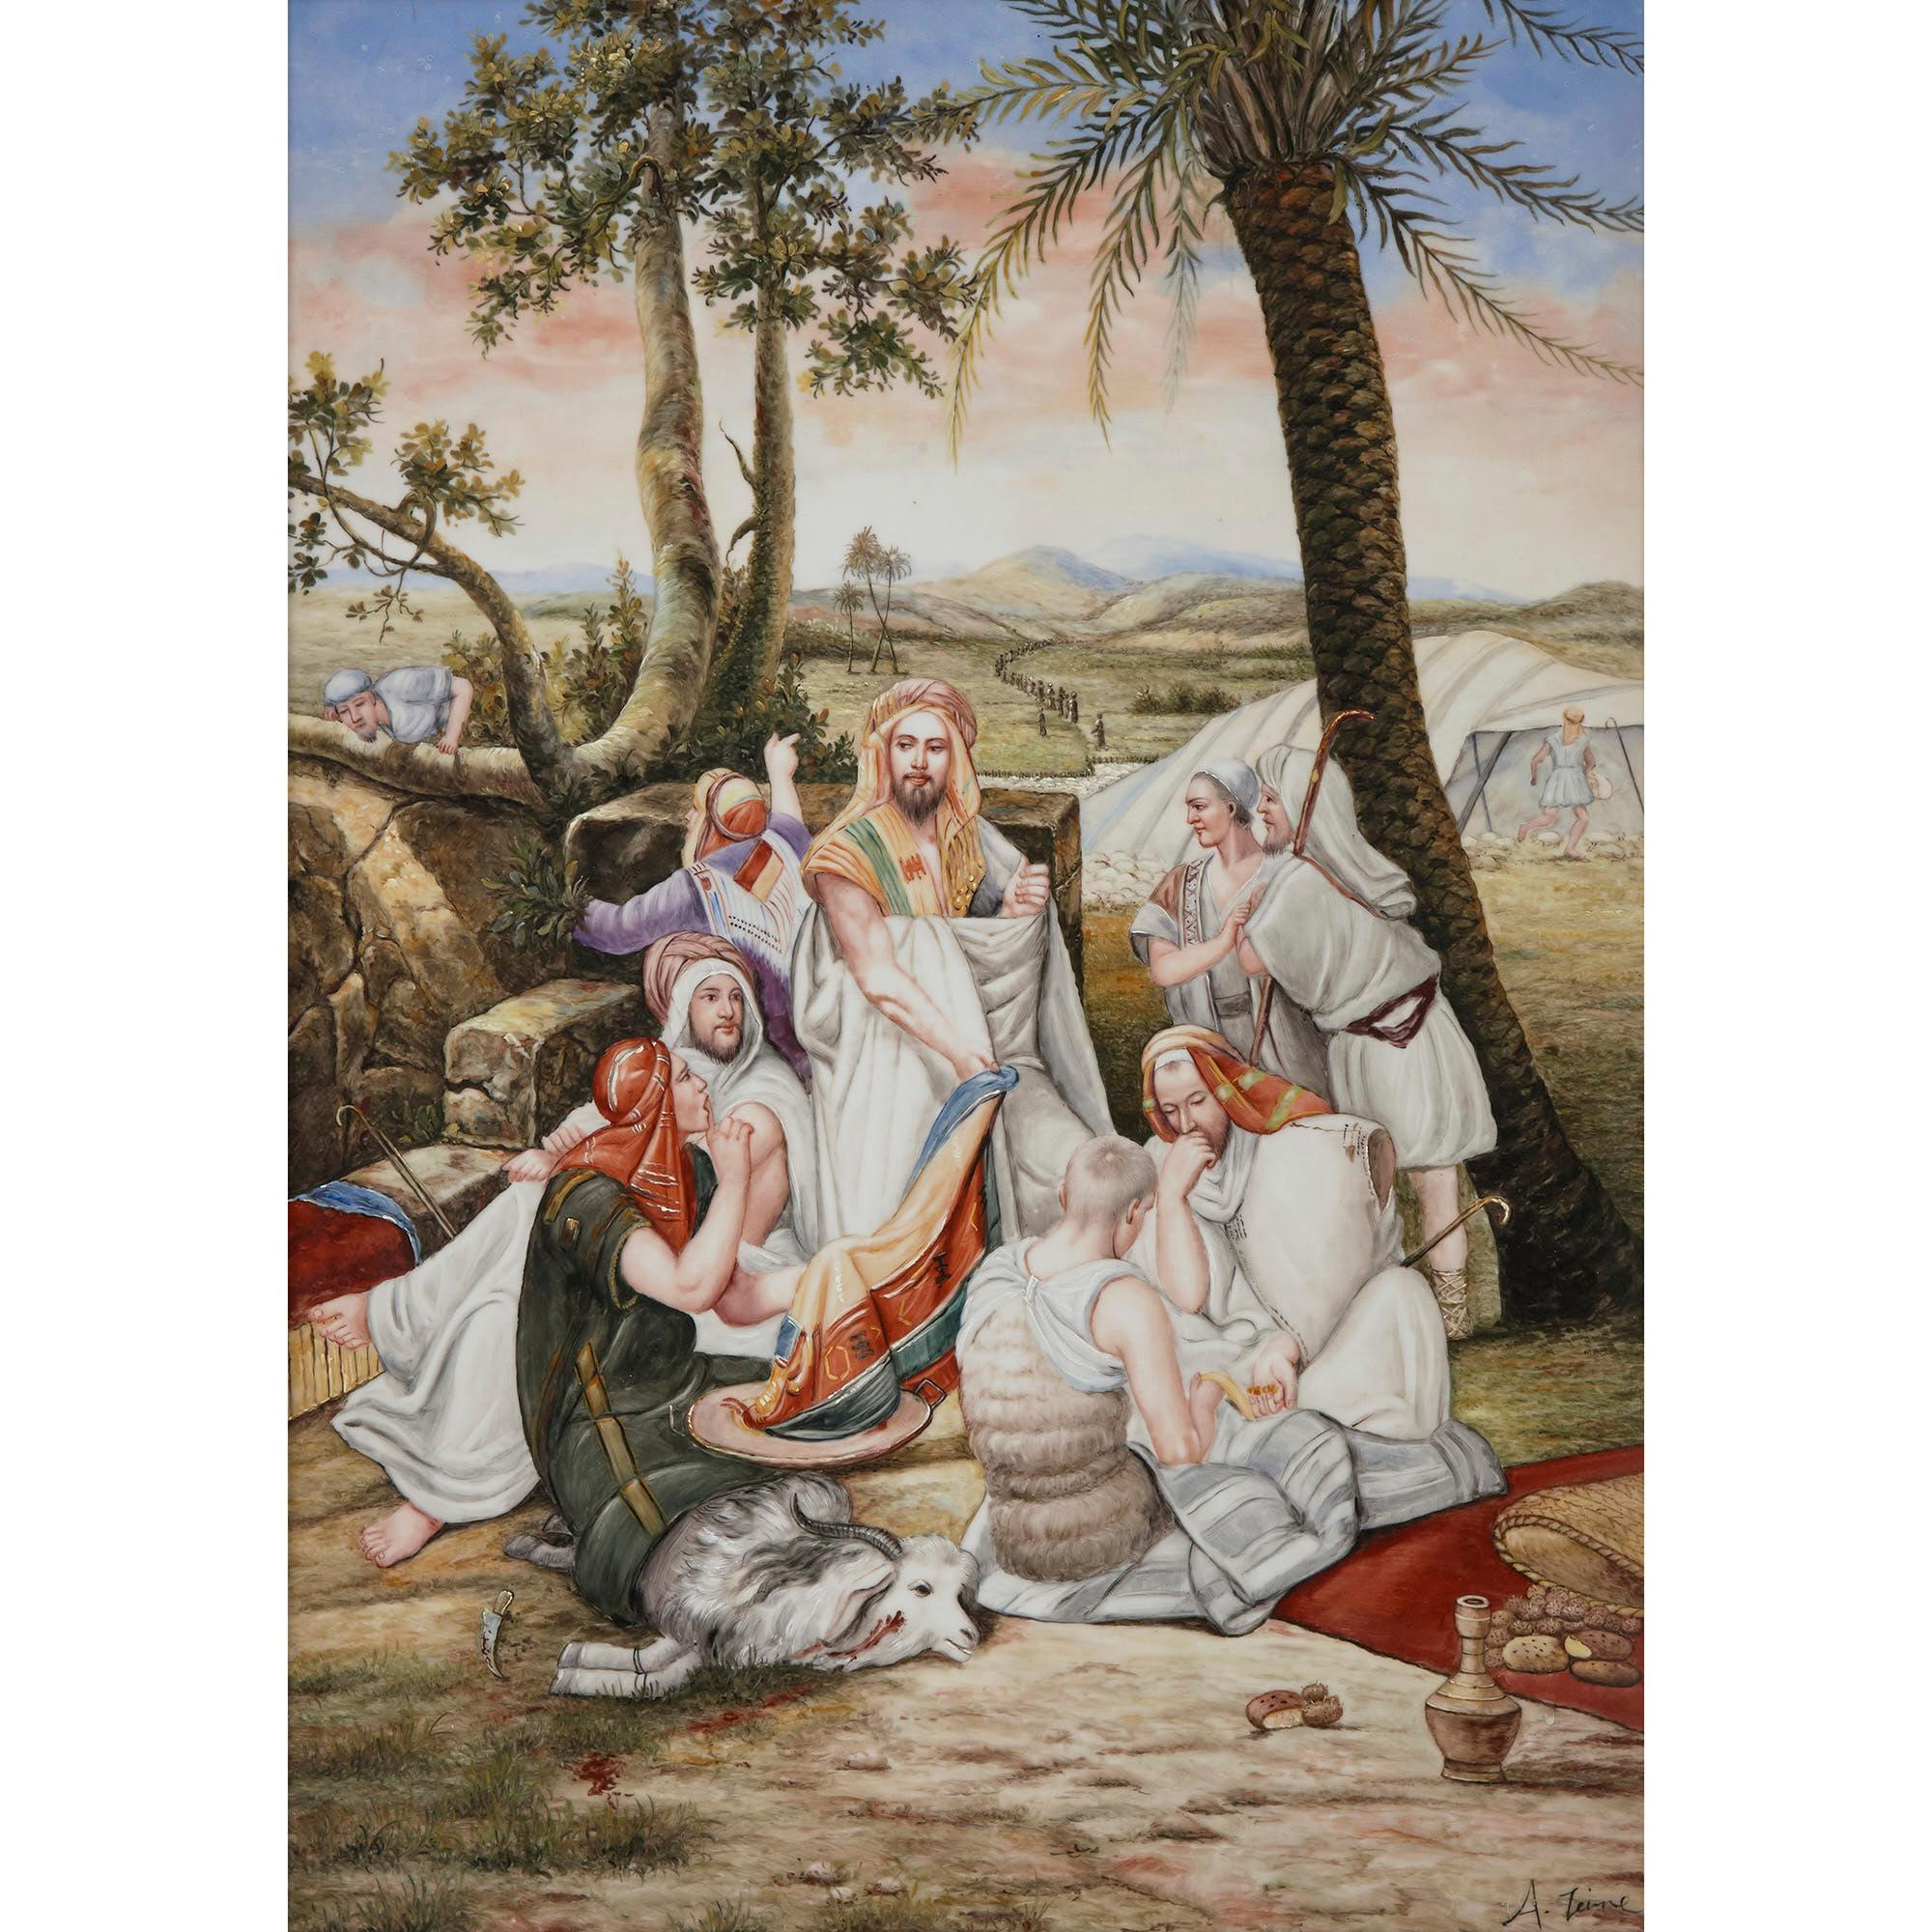 Orientalist German Painted KPM style porcelain plaque,
German, 20th century
Measures: Frame: Height 81cm, width 61cm, depth 5cm
Plaque: Height 69cm, width 48cm, depth 0.5cm

This beautifully porcelain plaque is painted in a charming manner, with